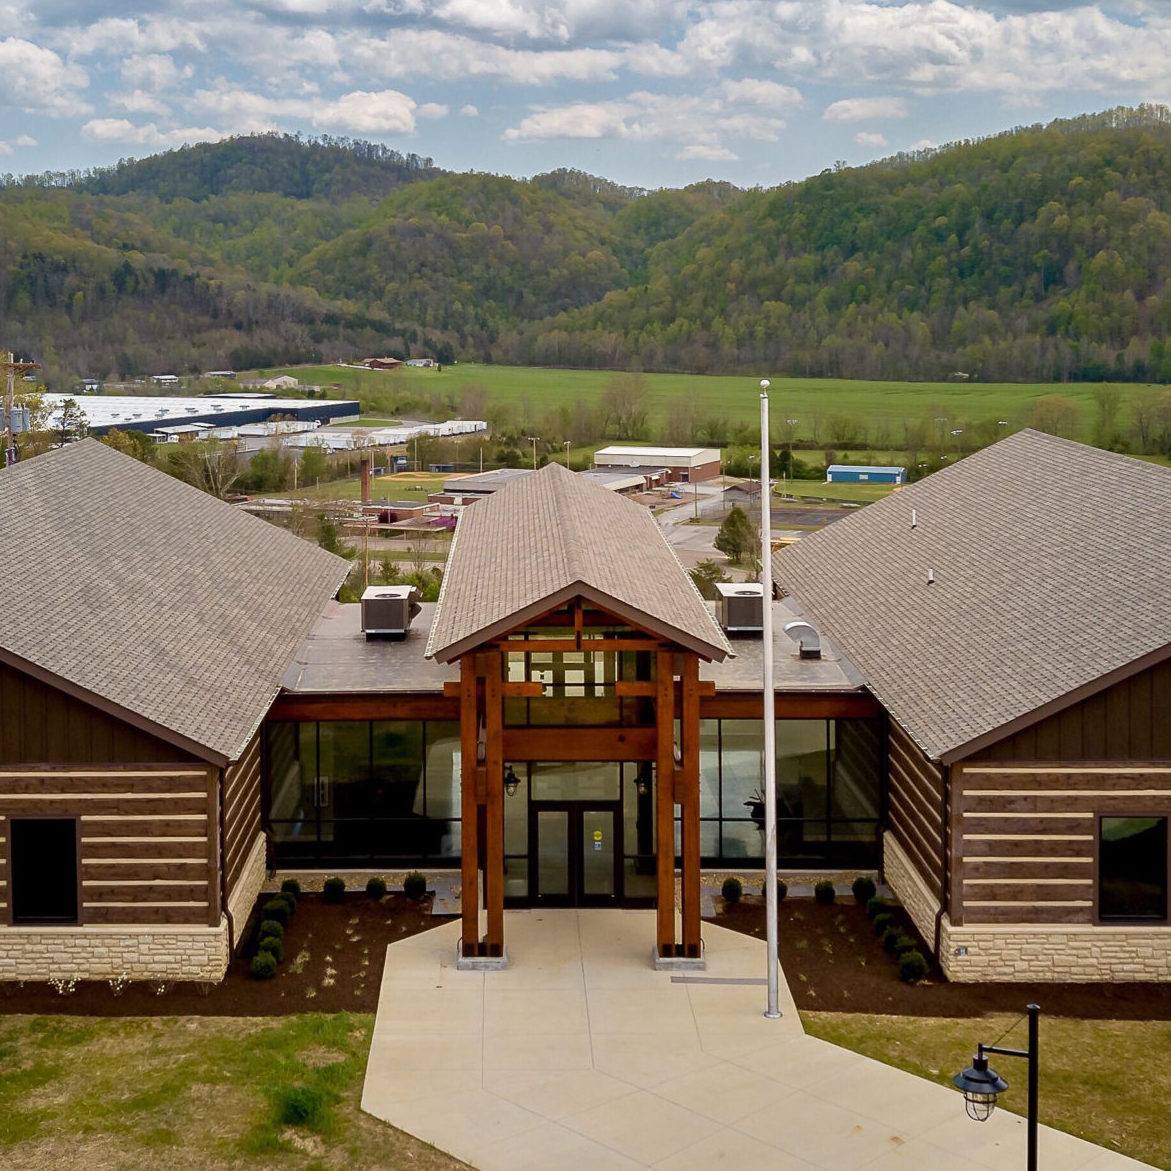 The Daniel Boone Wilderness Trail Interpretative Center with mountains in the background.